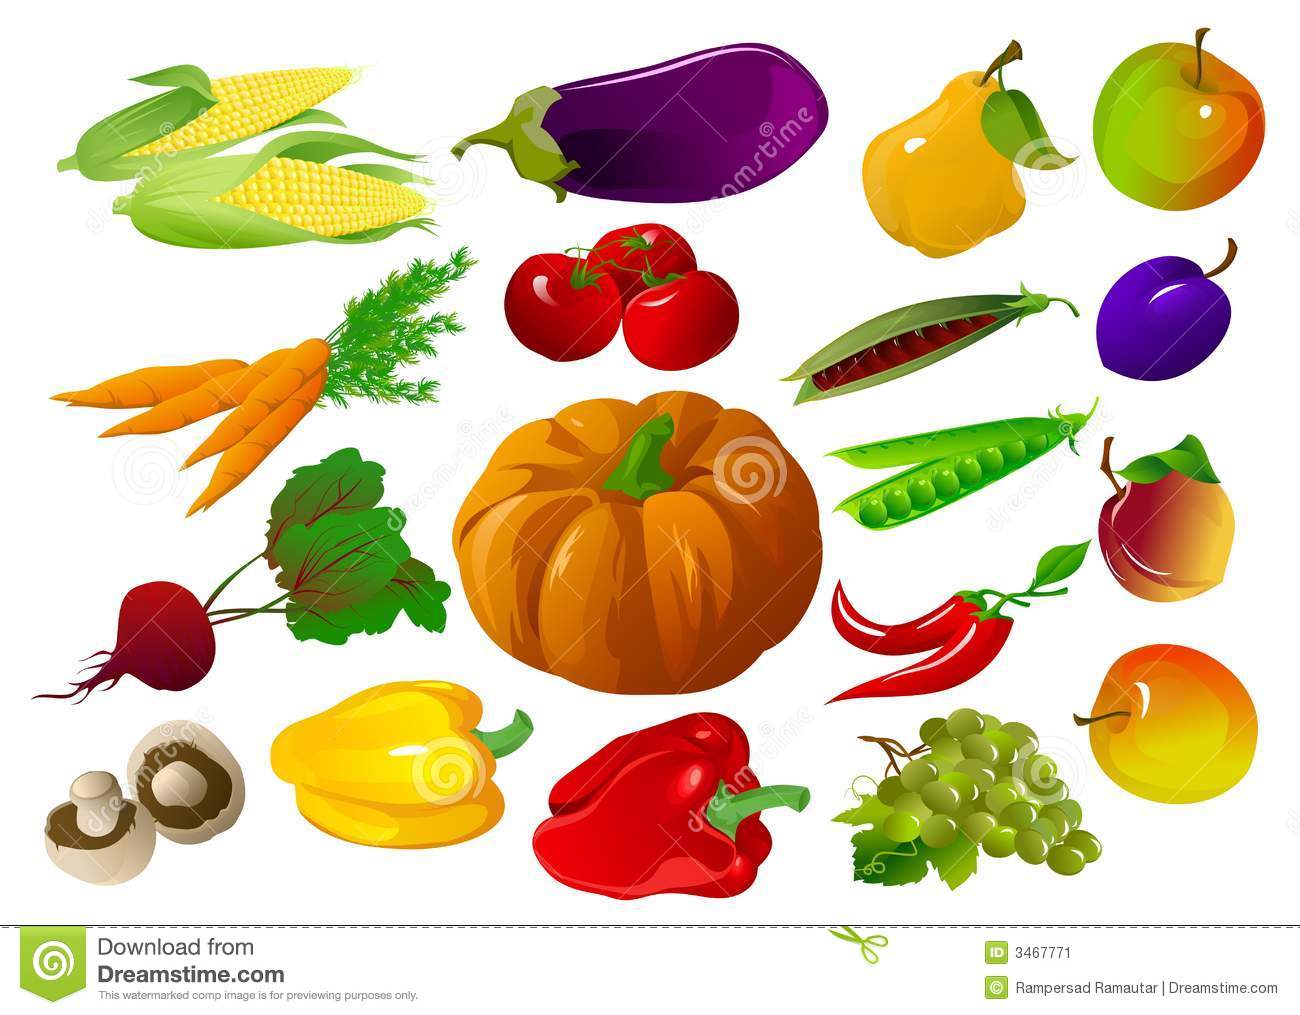 jar of whole pickles clipart.